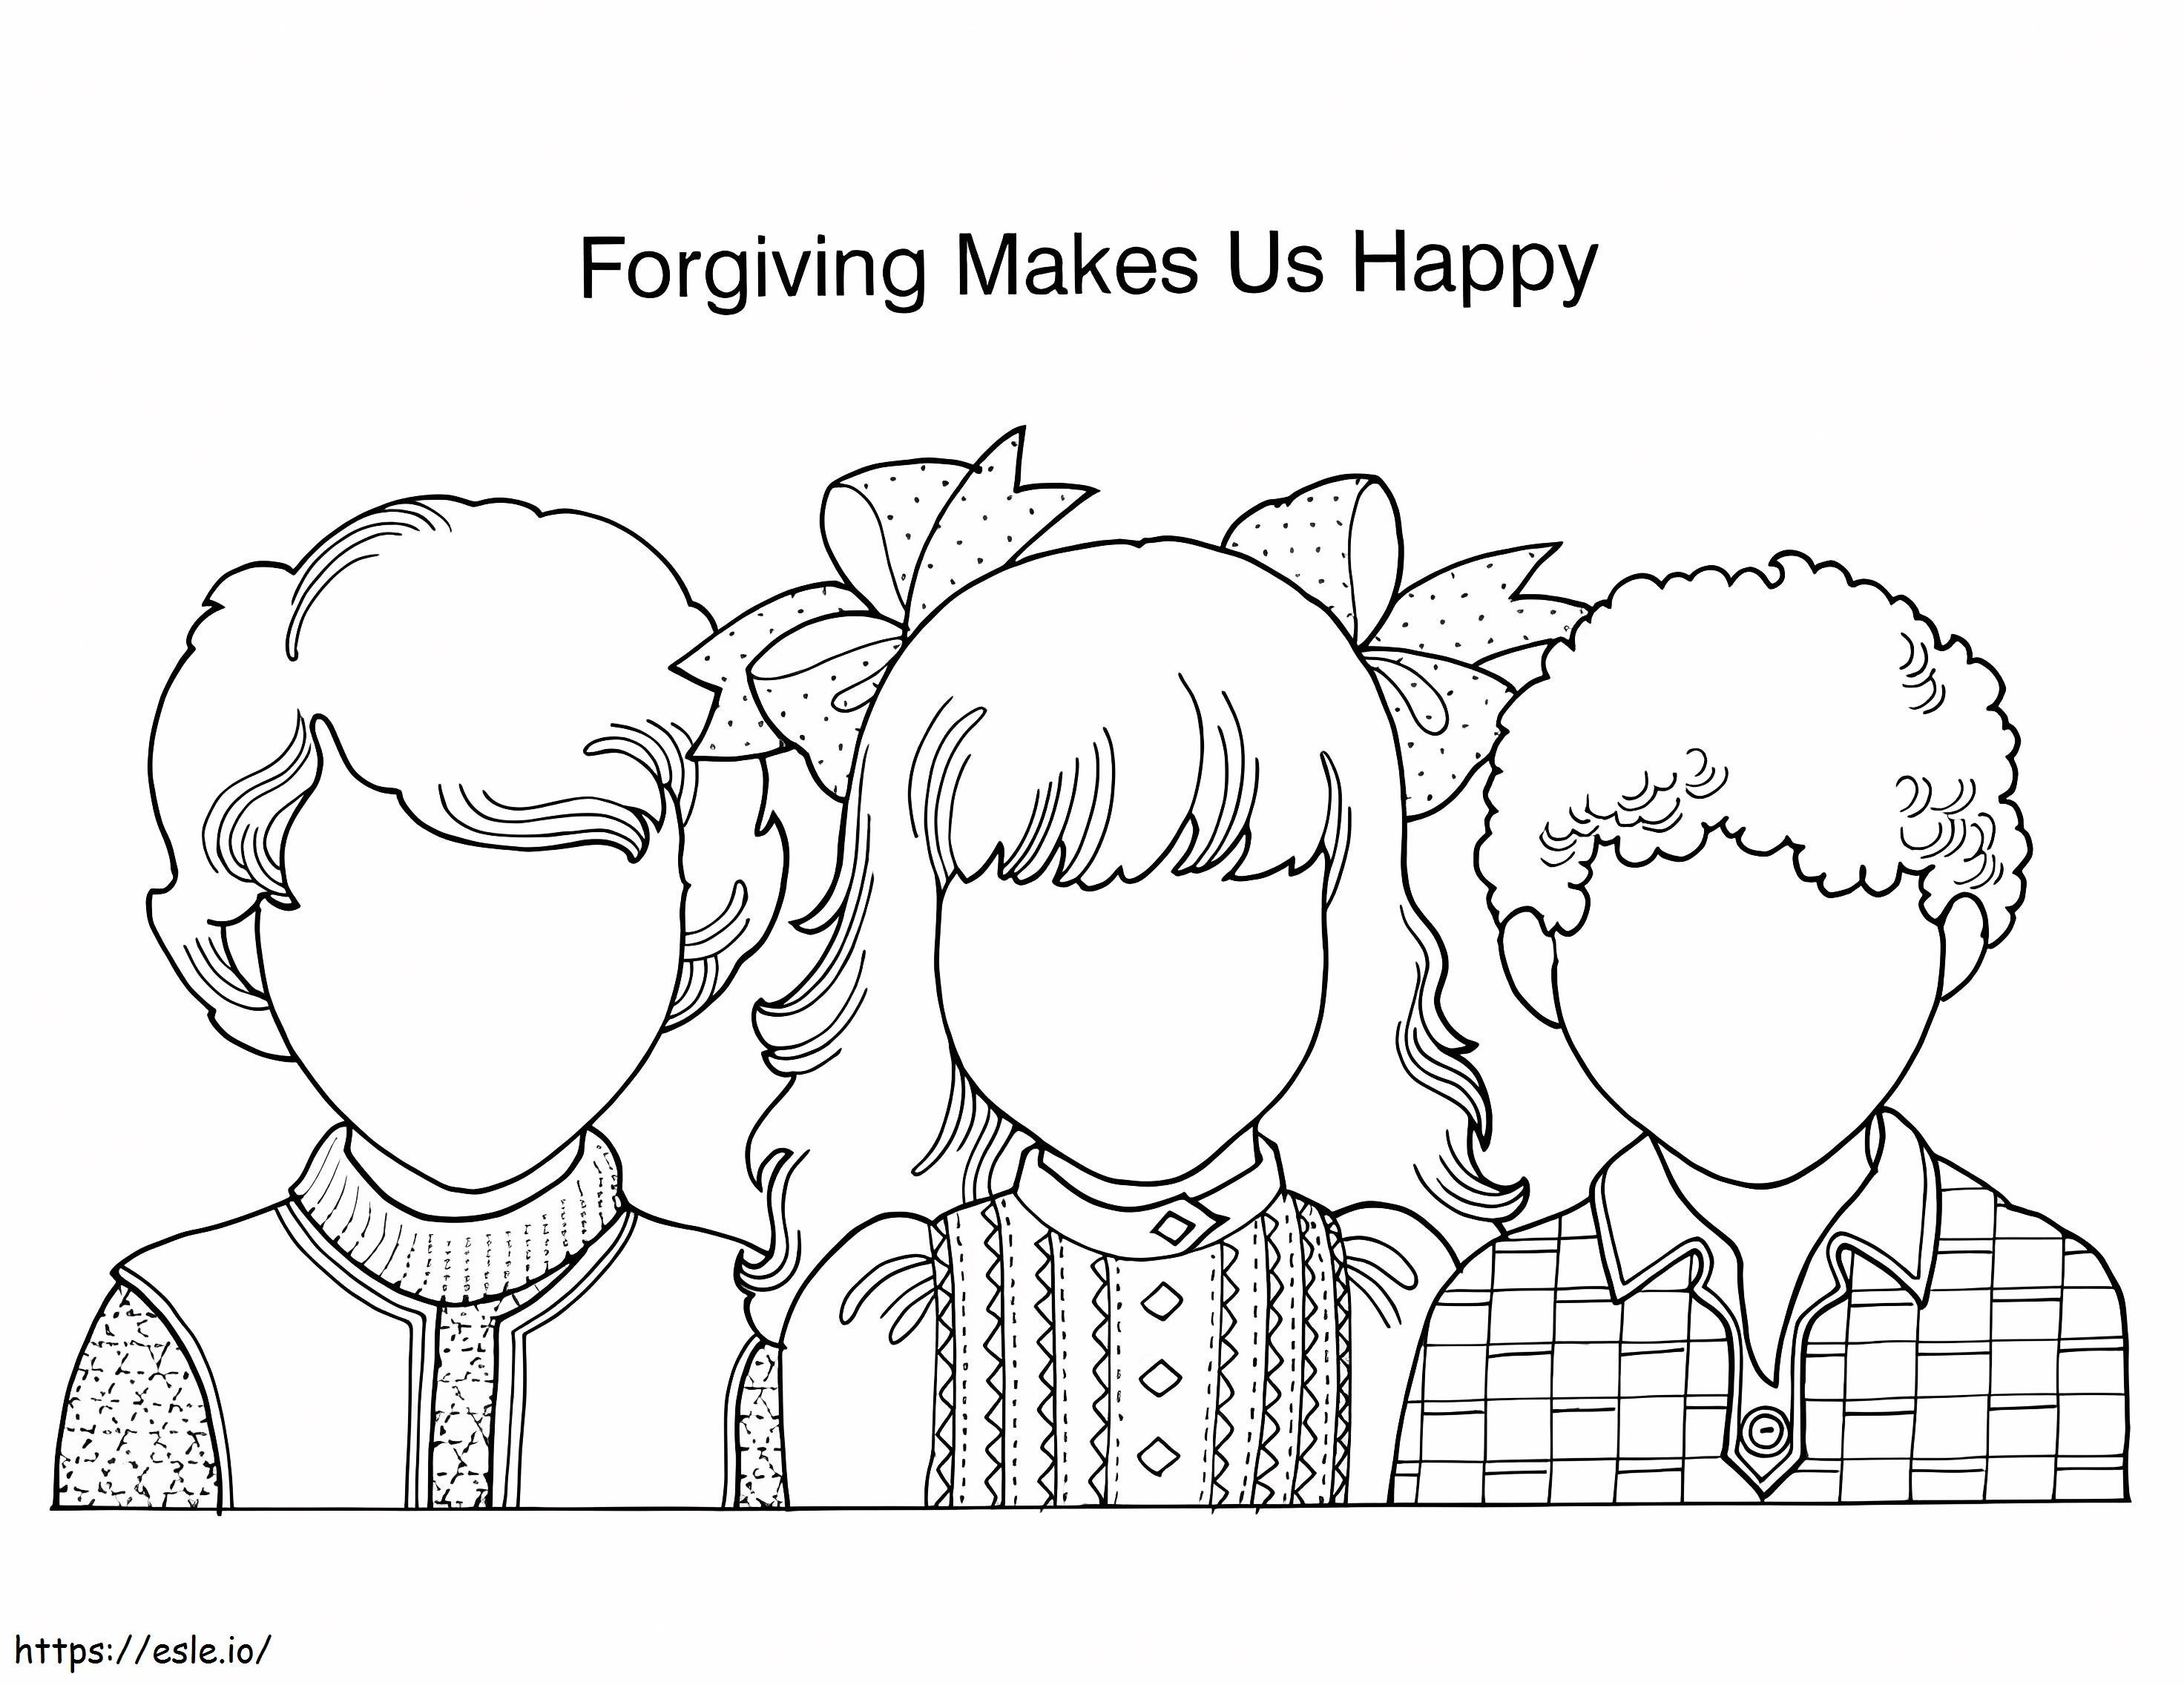 Forgiving Makes Us Happy coloring page